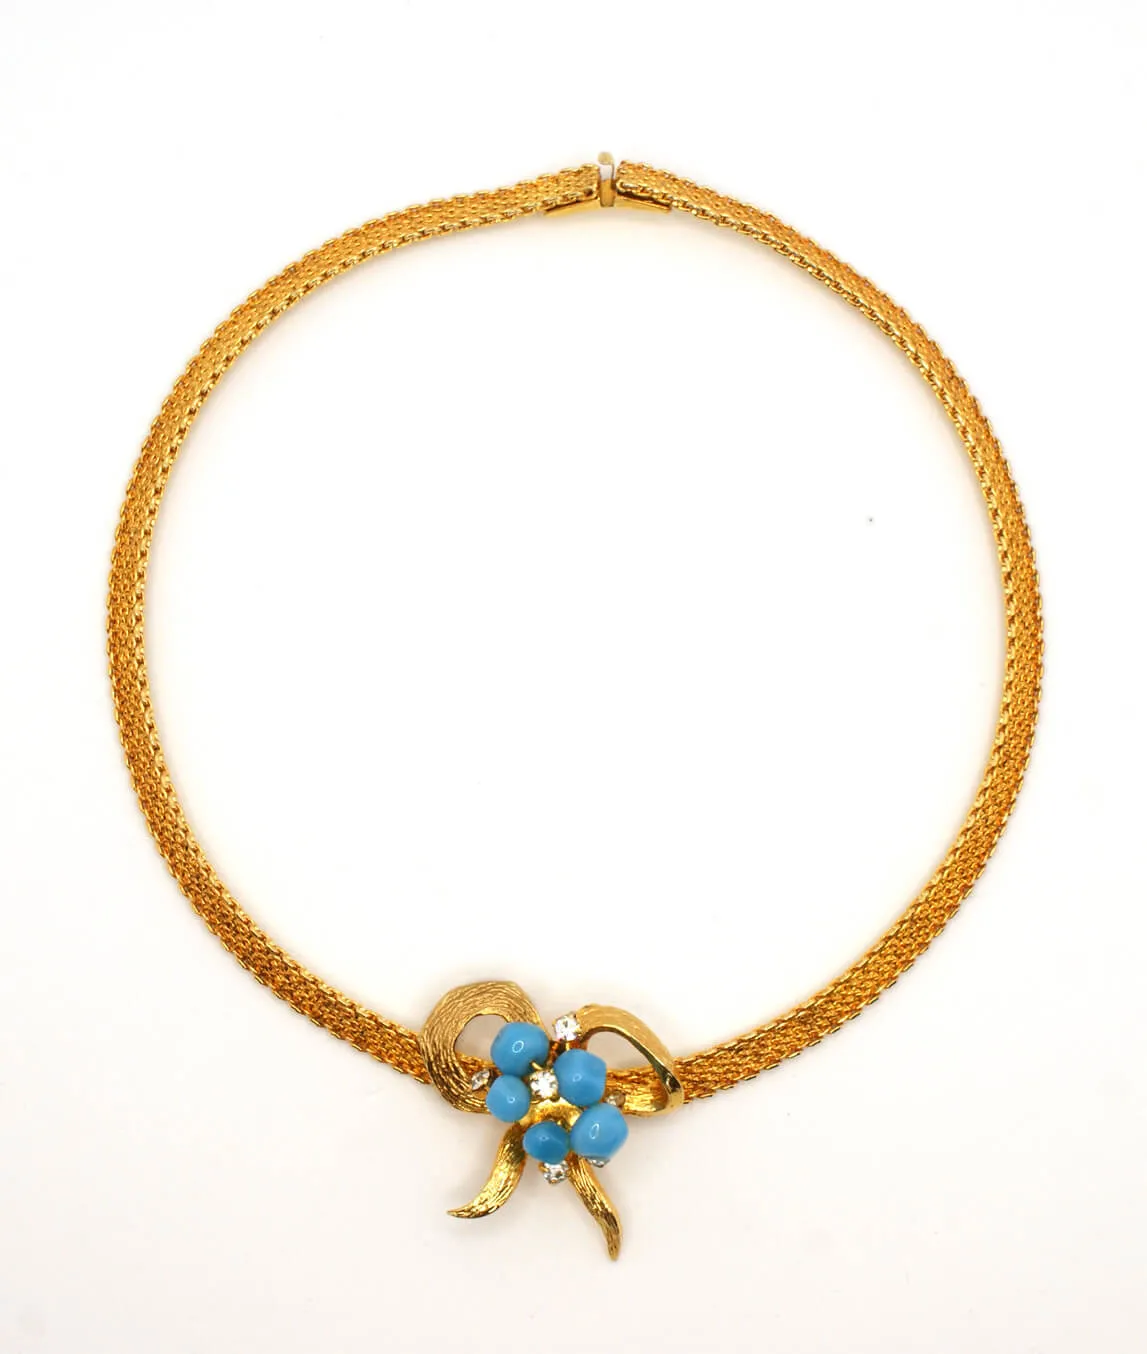 Vintage Christian Dior choker with bow detail and turquoise